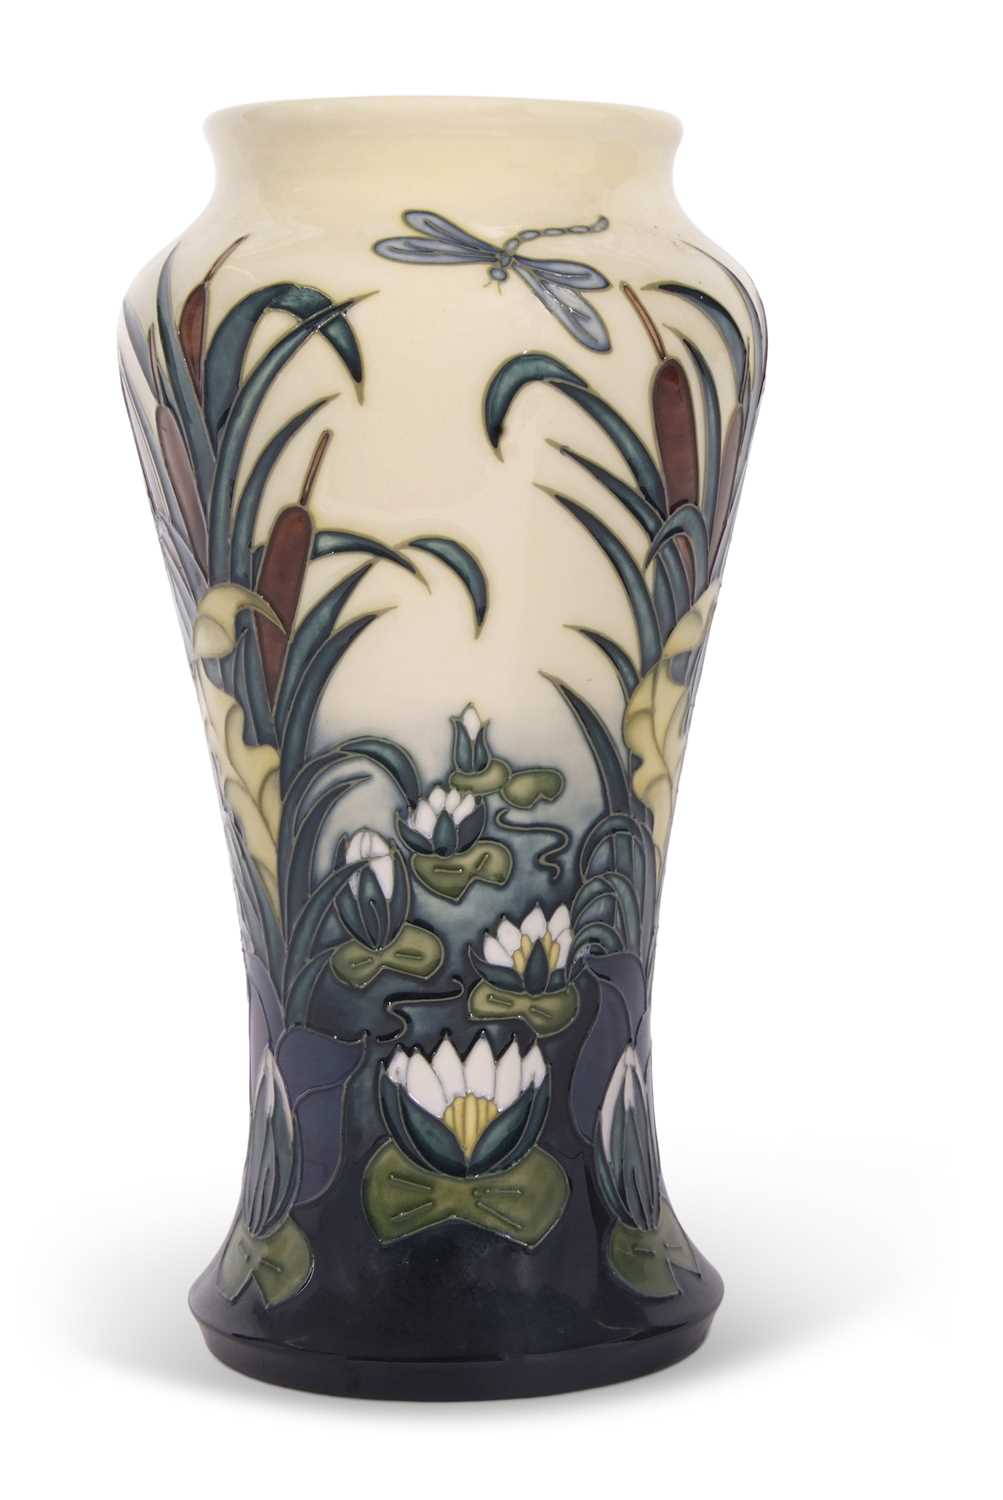 A tall modern Moorcroft vase designed by Rachel Bishop in the Lamia pattern with factory mark to